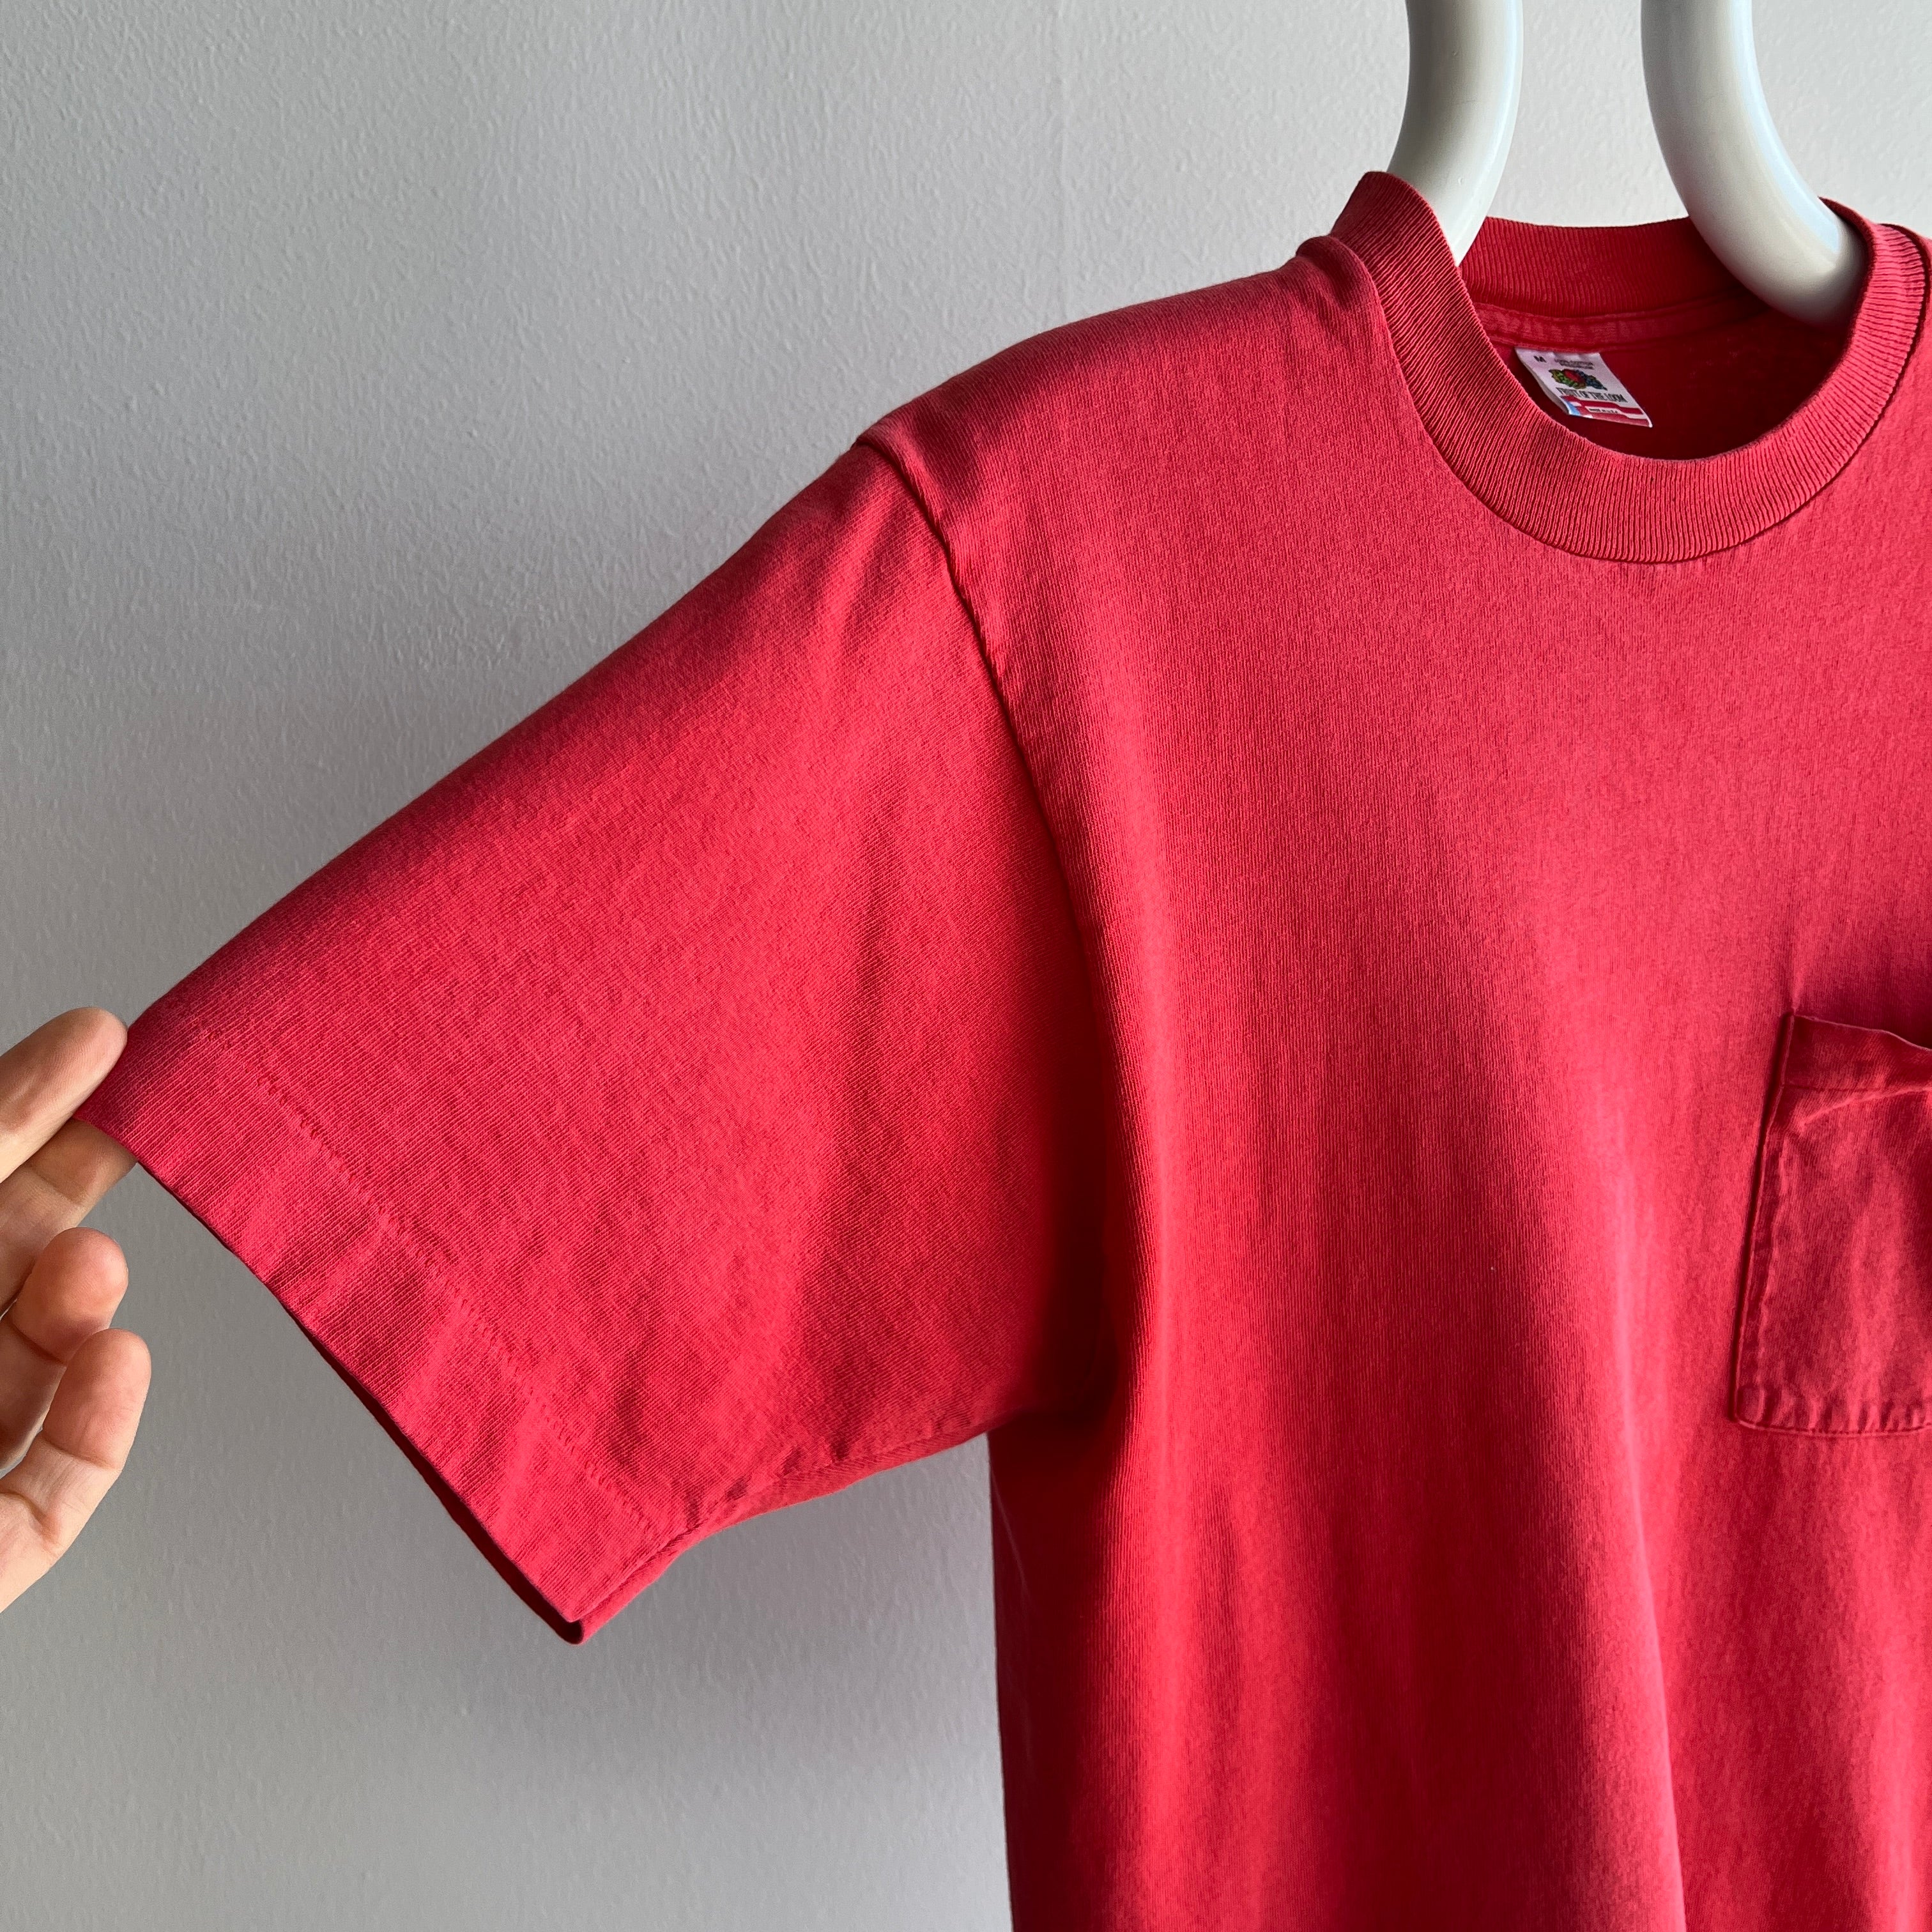 1980s Perfectly Sun Faded Cotton Selvedge Pocket FOTL T-Shirt 